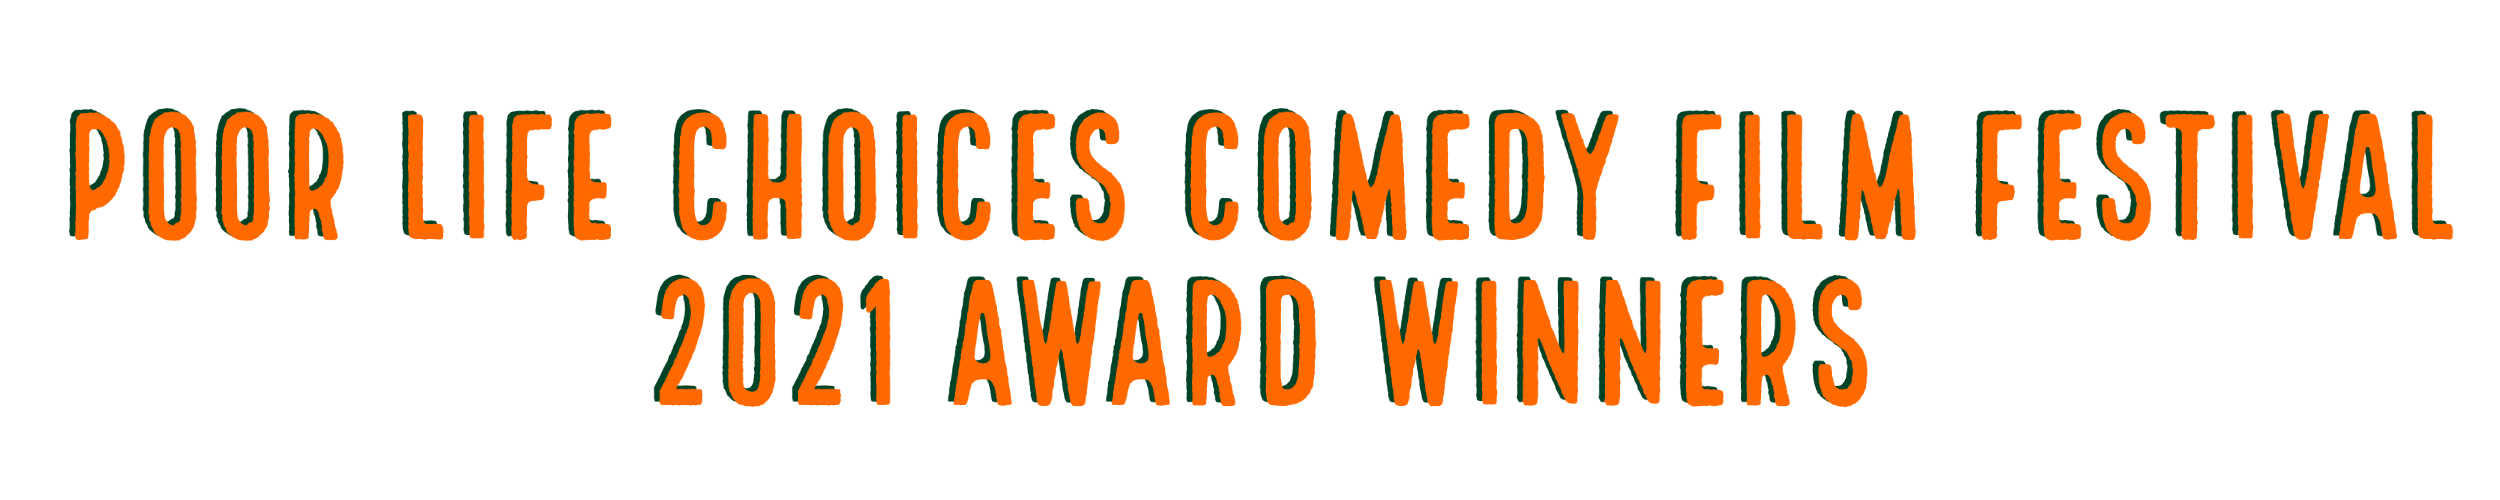 POOR LIFE CHOICES COMEDY FILM FESTIVAL 2021 AWARD WINNERS